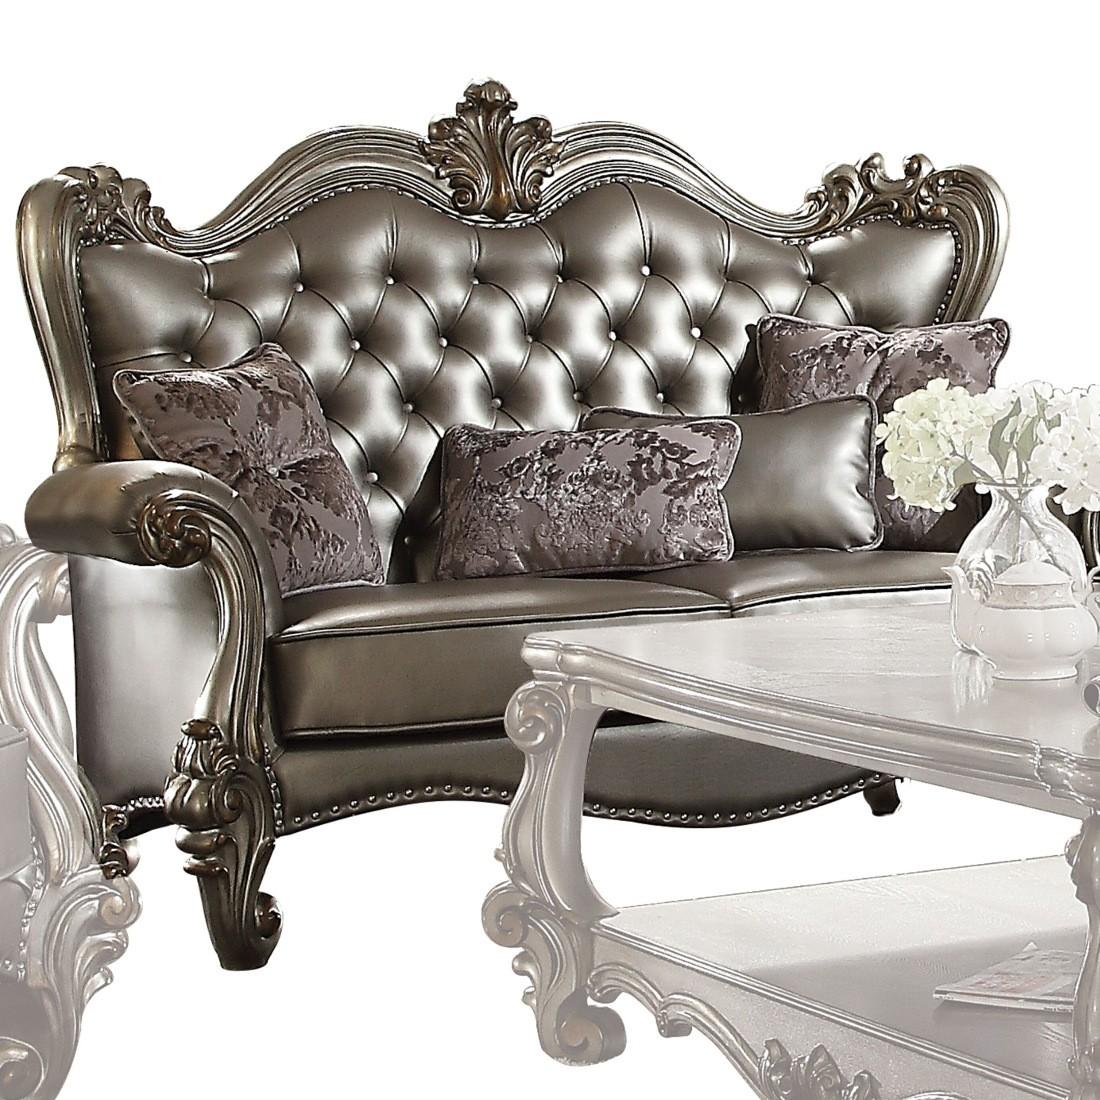 Traditional,  Vintage Loveseat Versailles-56821 Versailles-56821 in Platinum, Antique, Silver Faux Leather